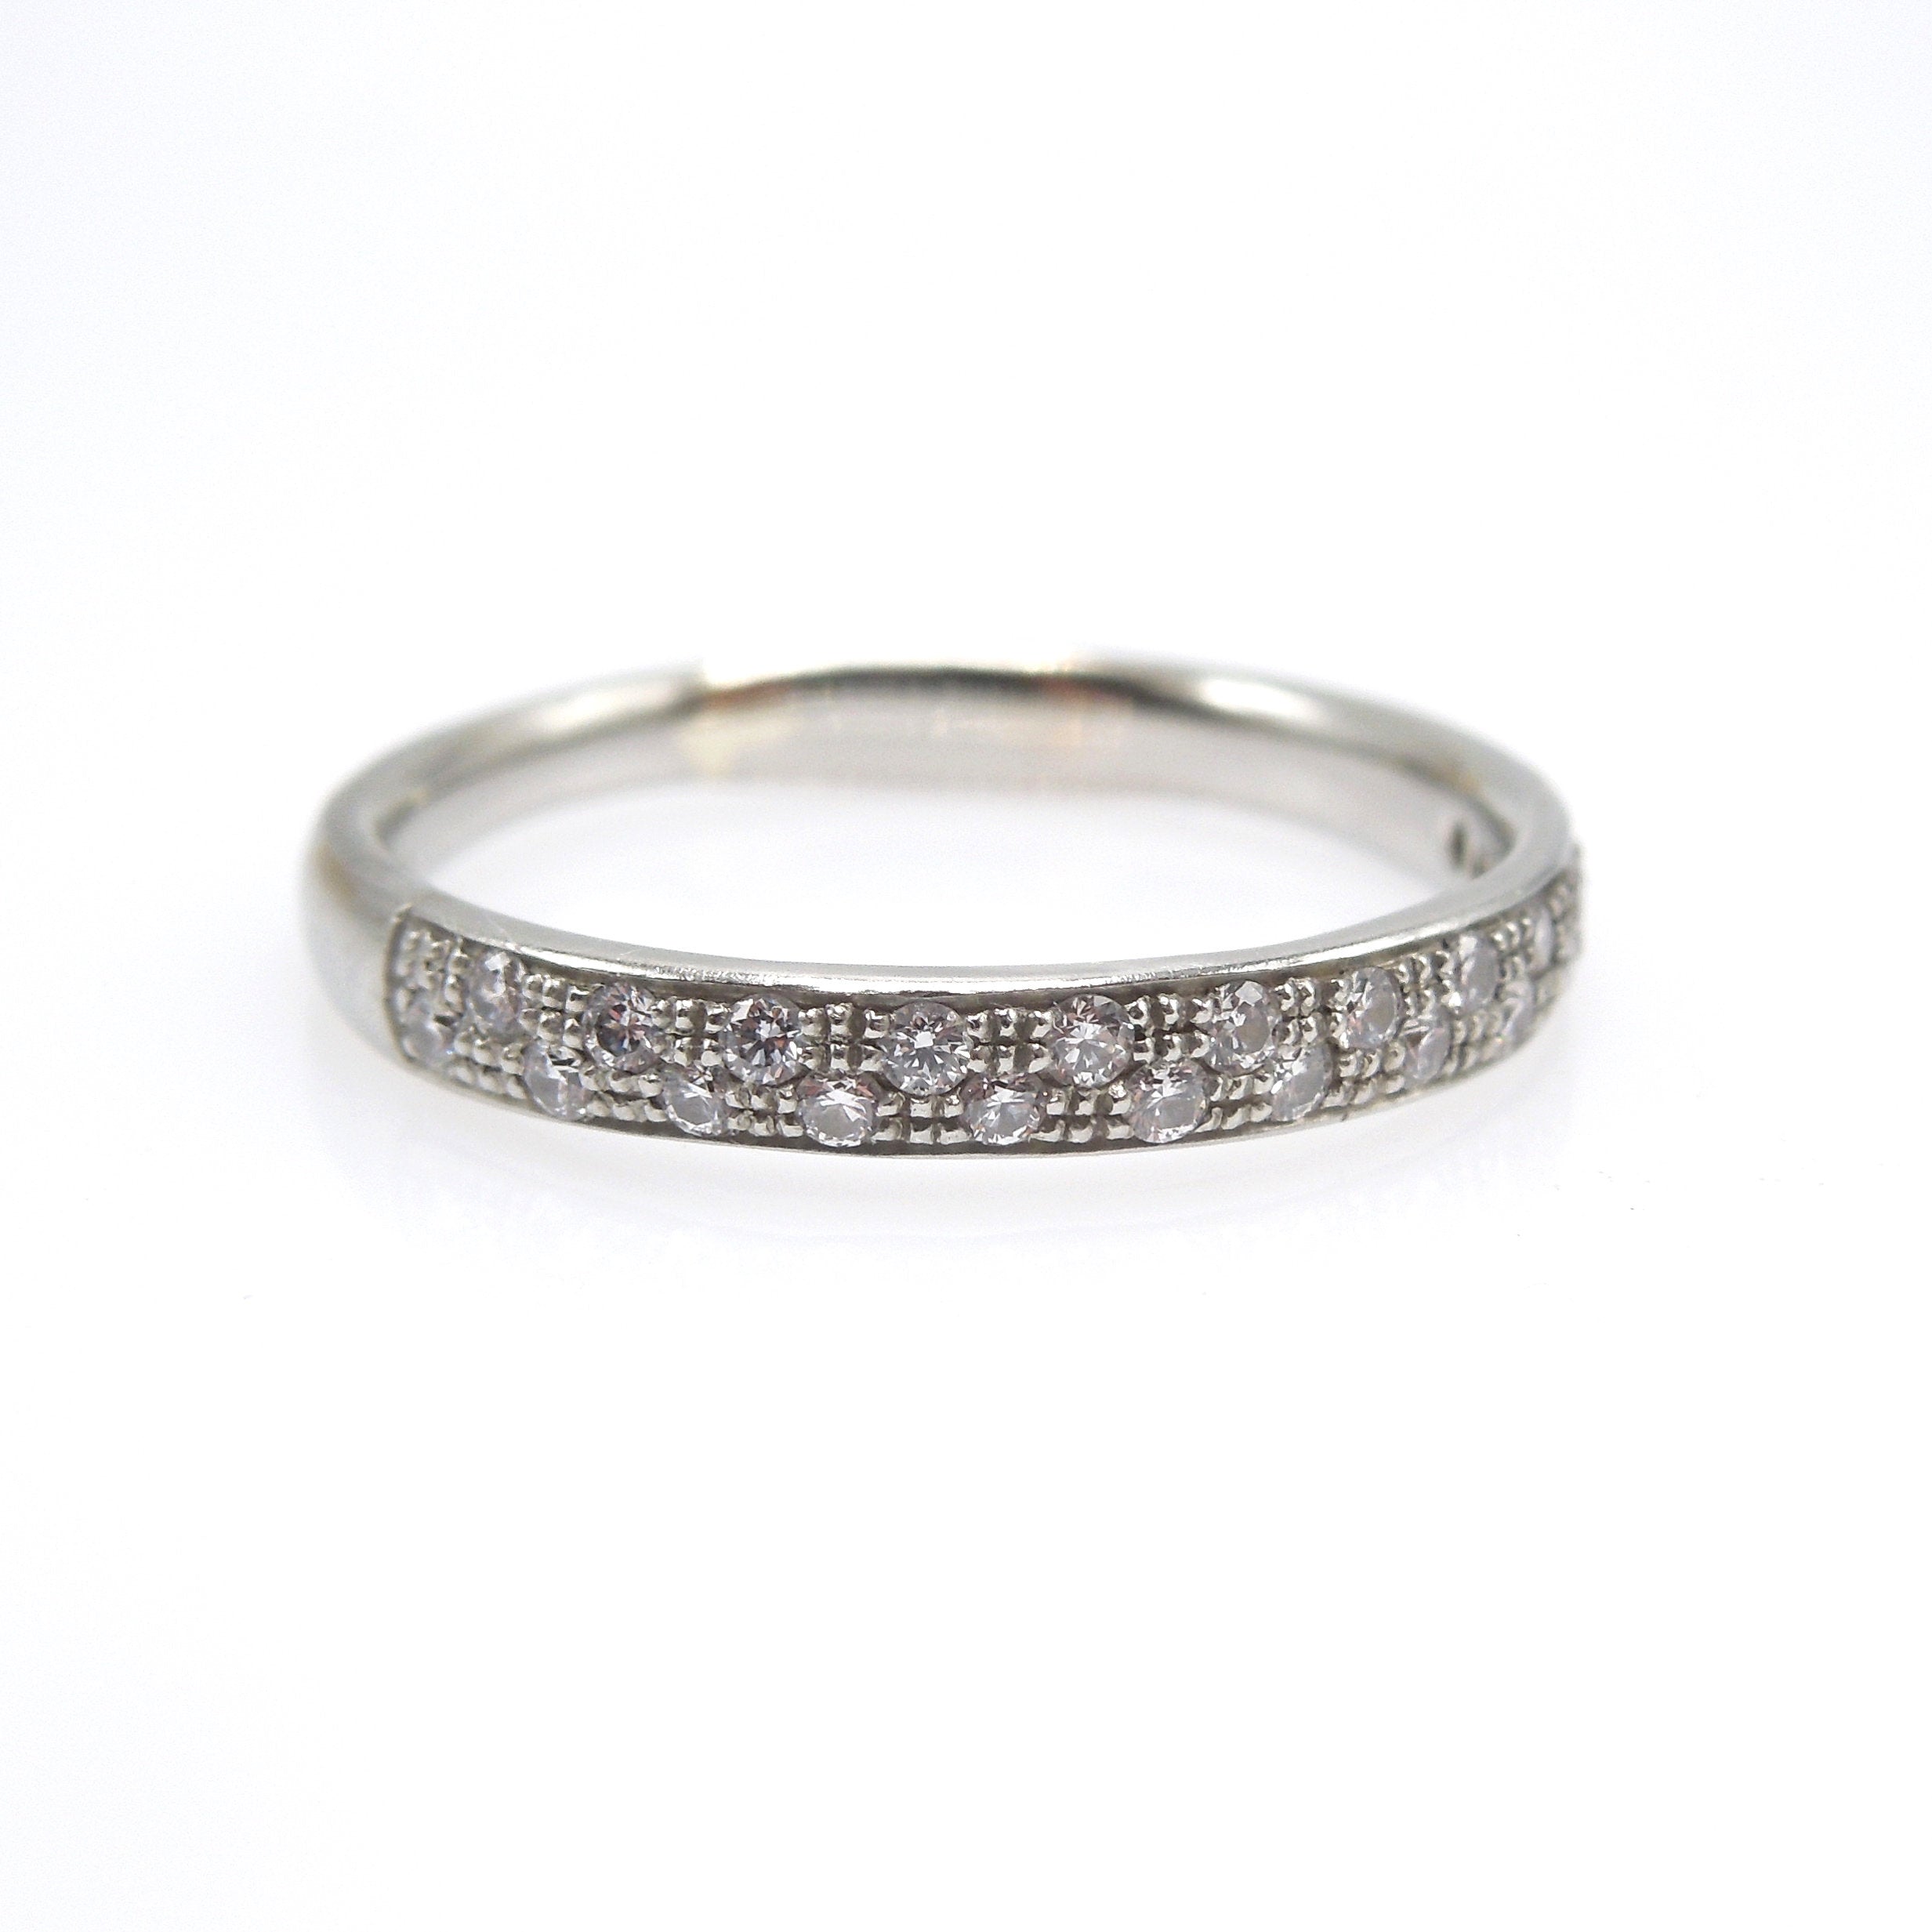 14K White Gold Wedding Band with Staggered Diamonds